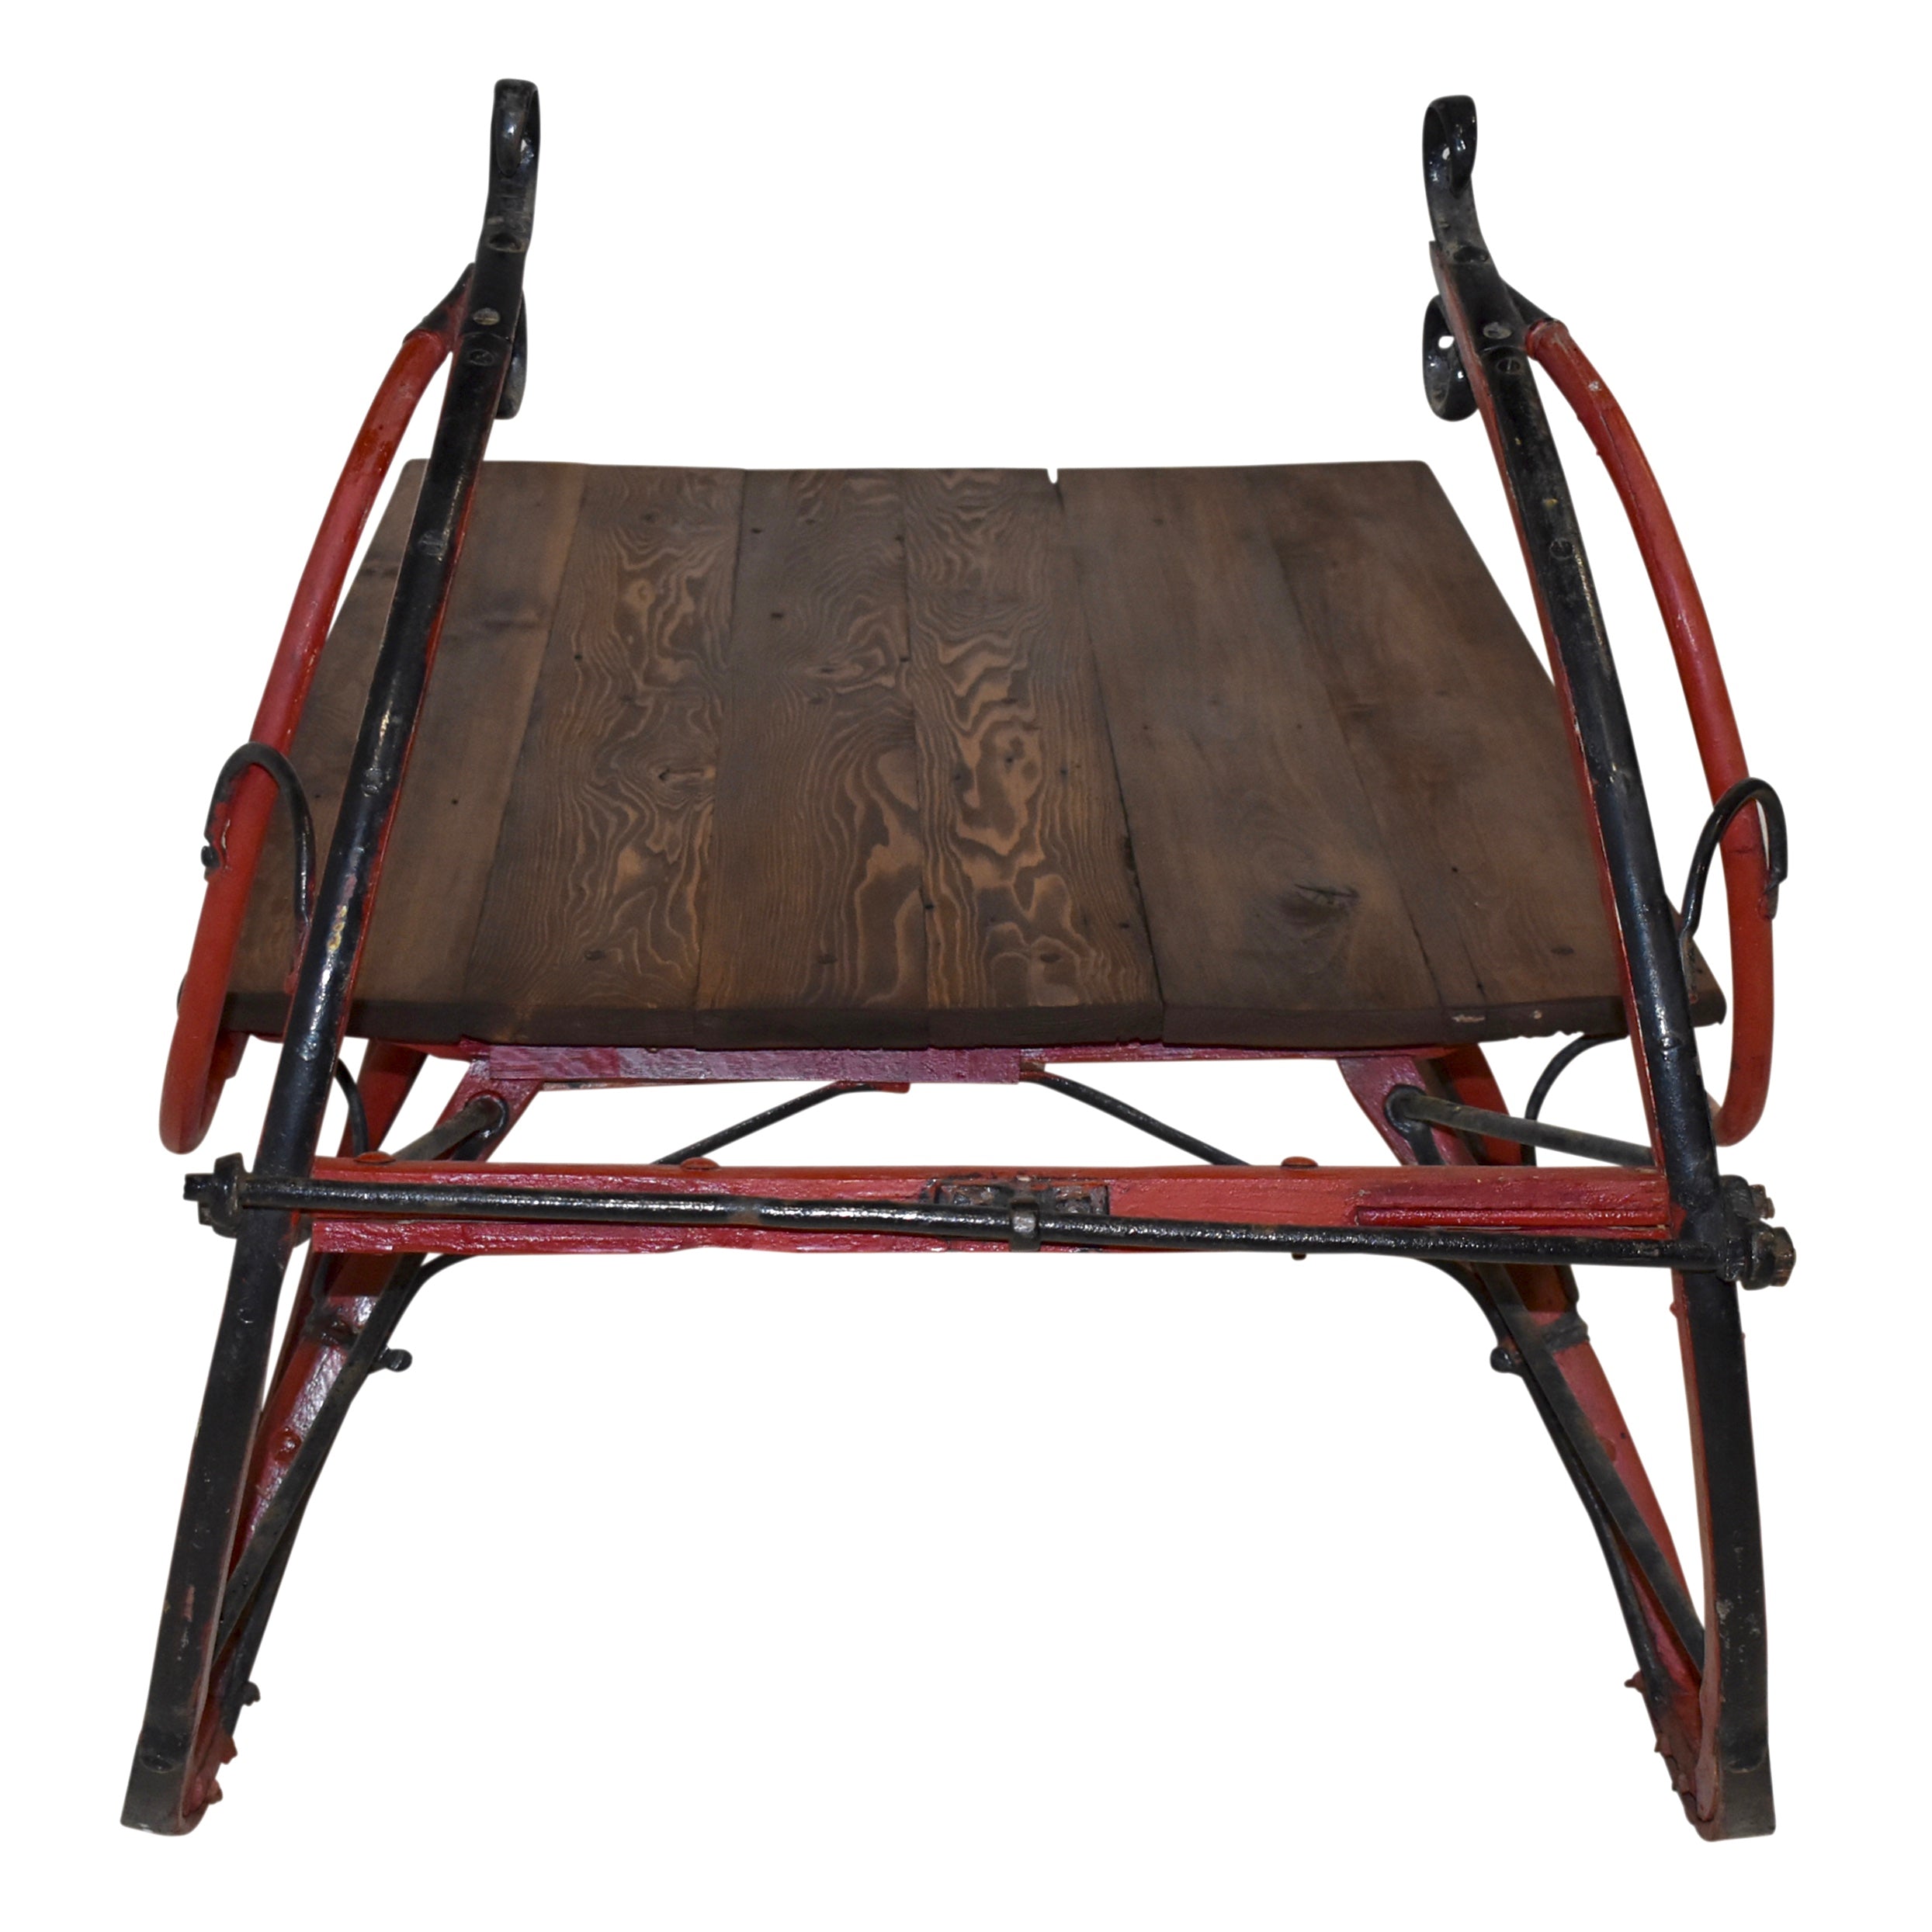 Sleigh Coffee Table with Red Runners